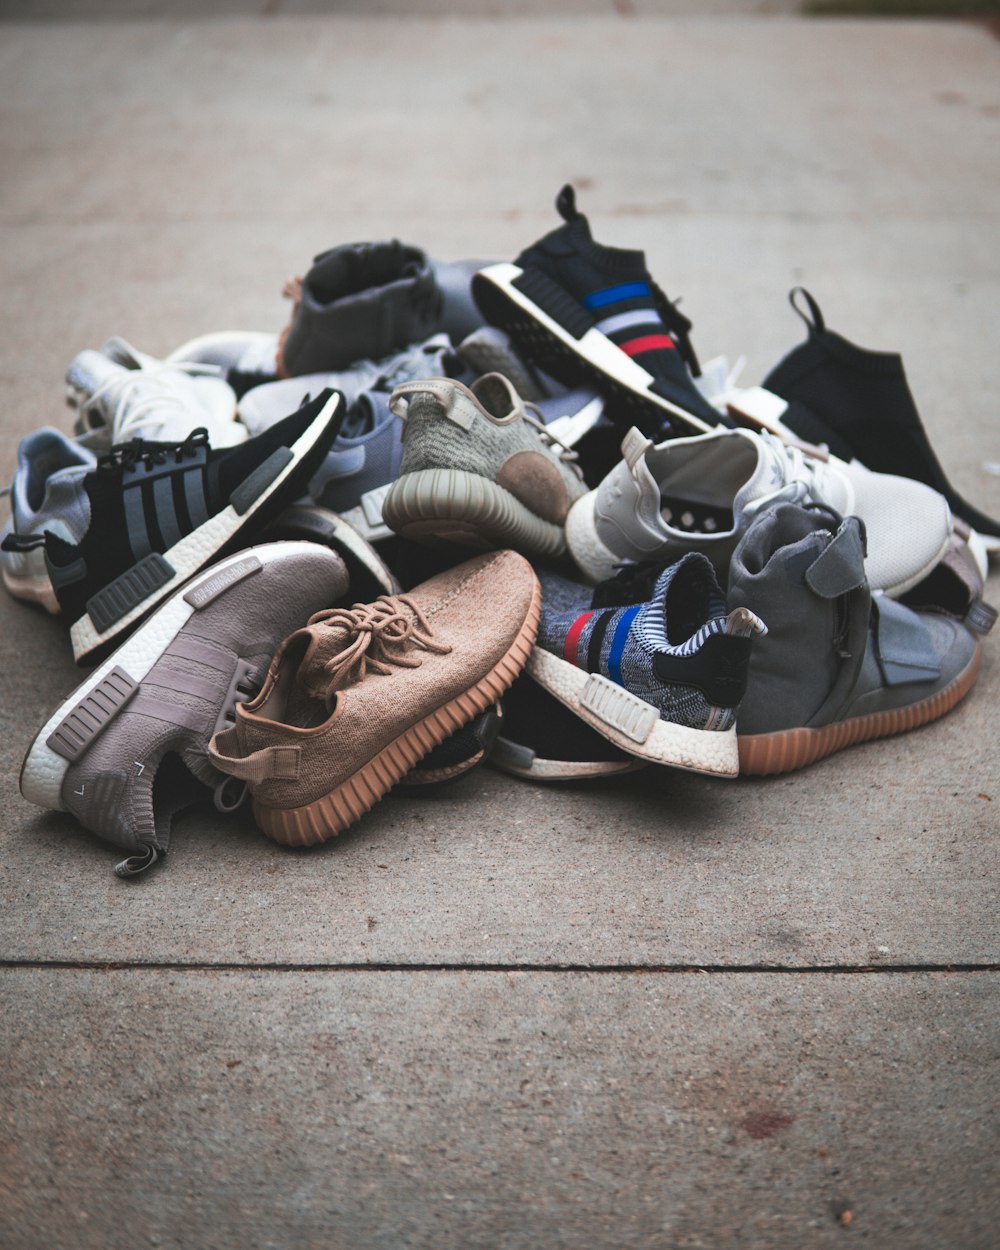 adidas sneakers on wooden surface photo – Free Shoe Image on Unsplash